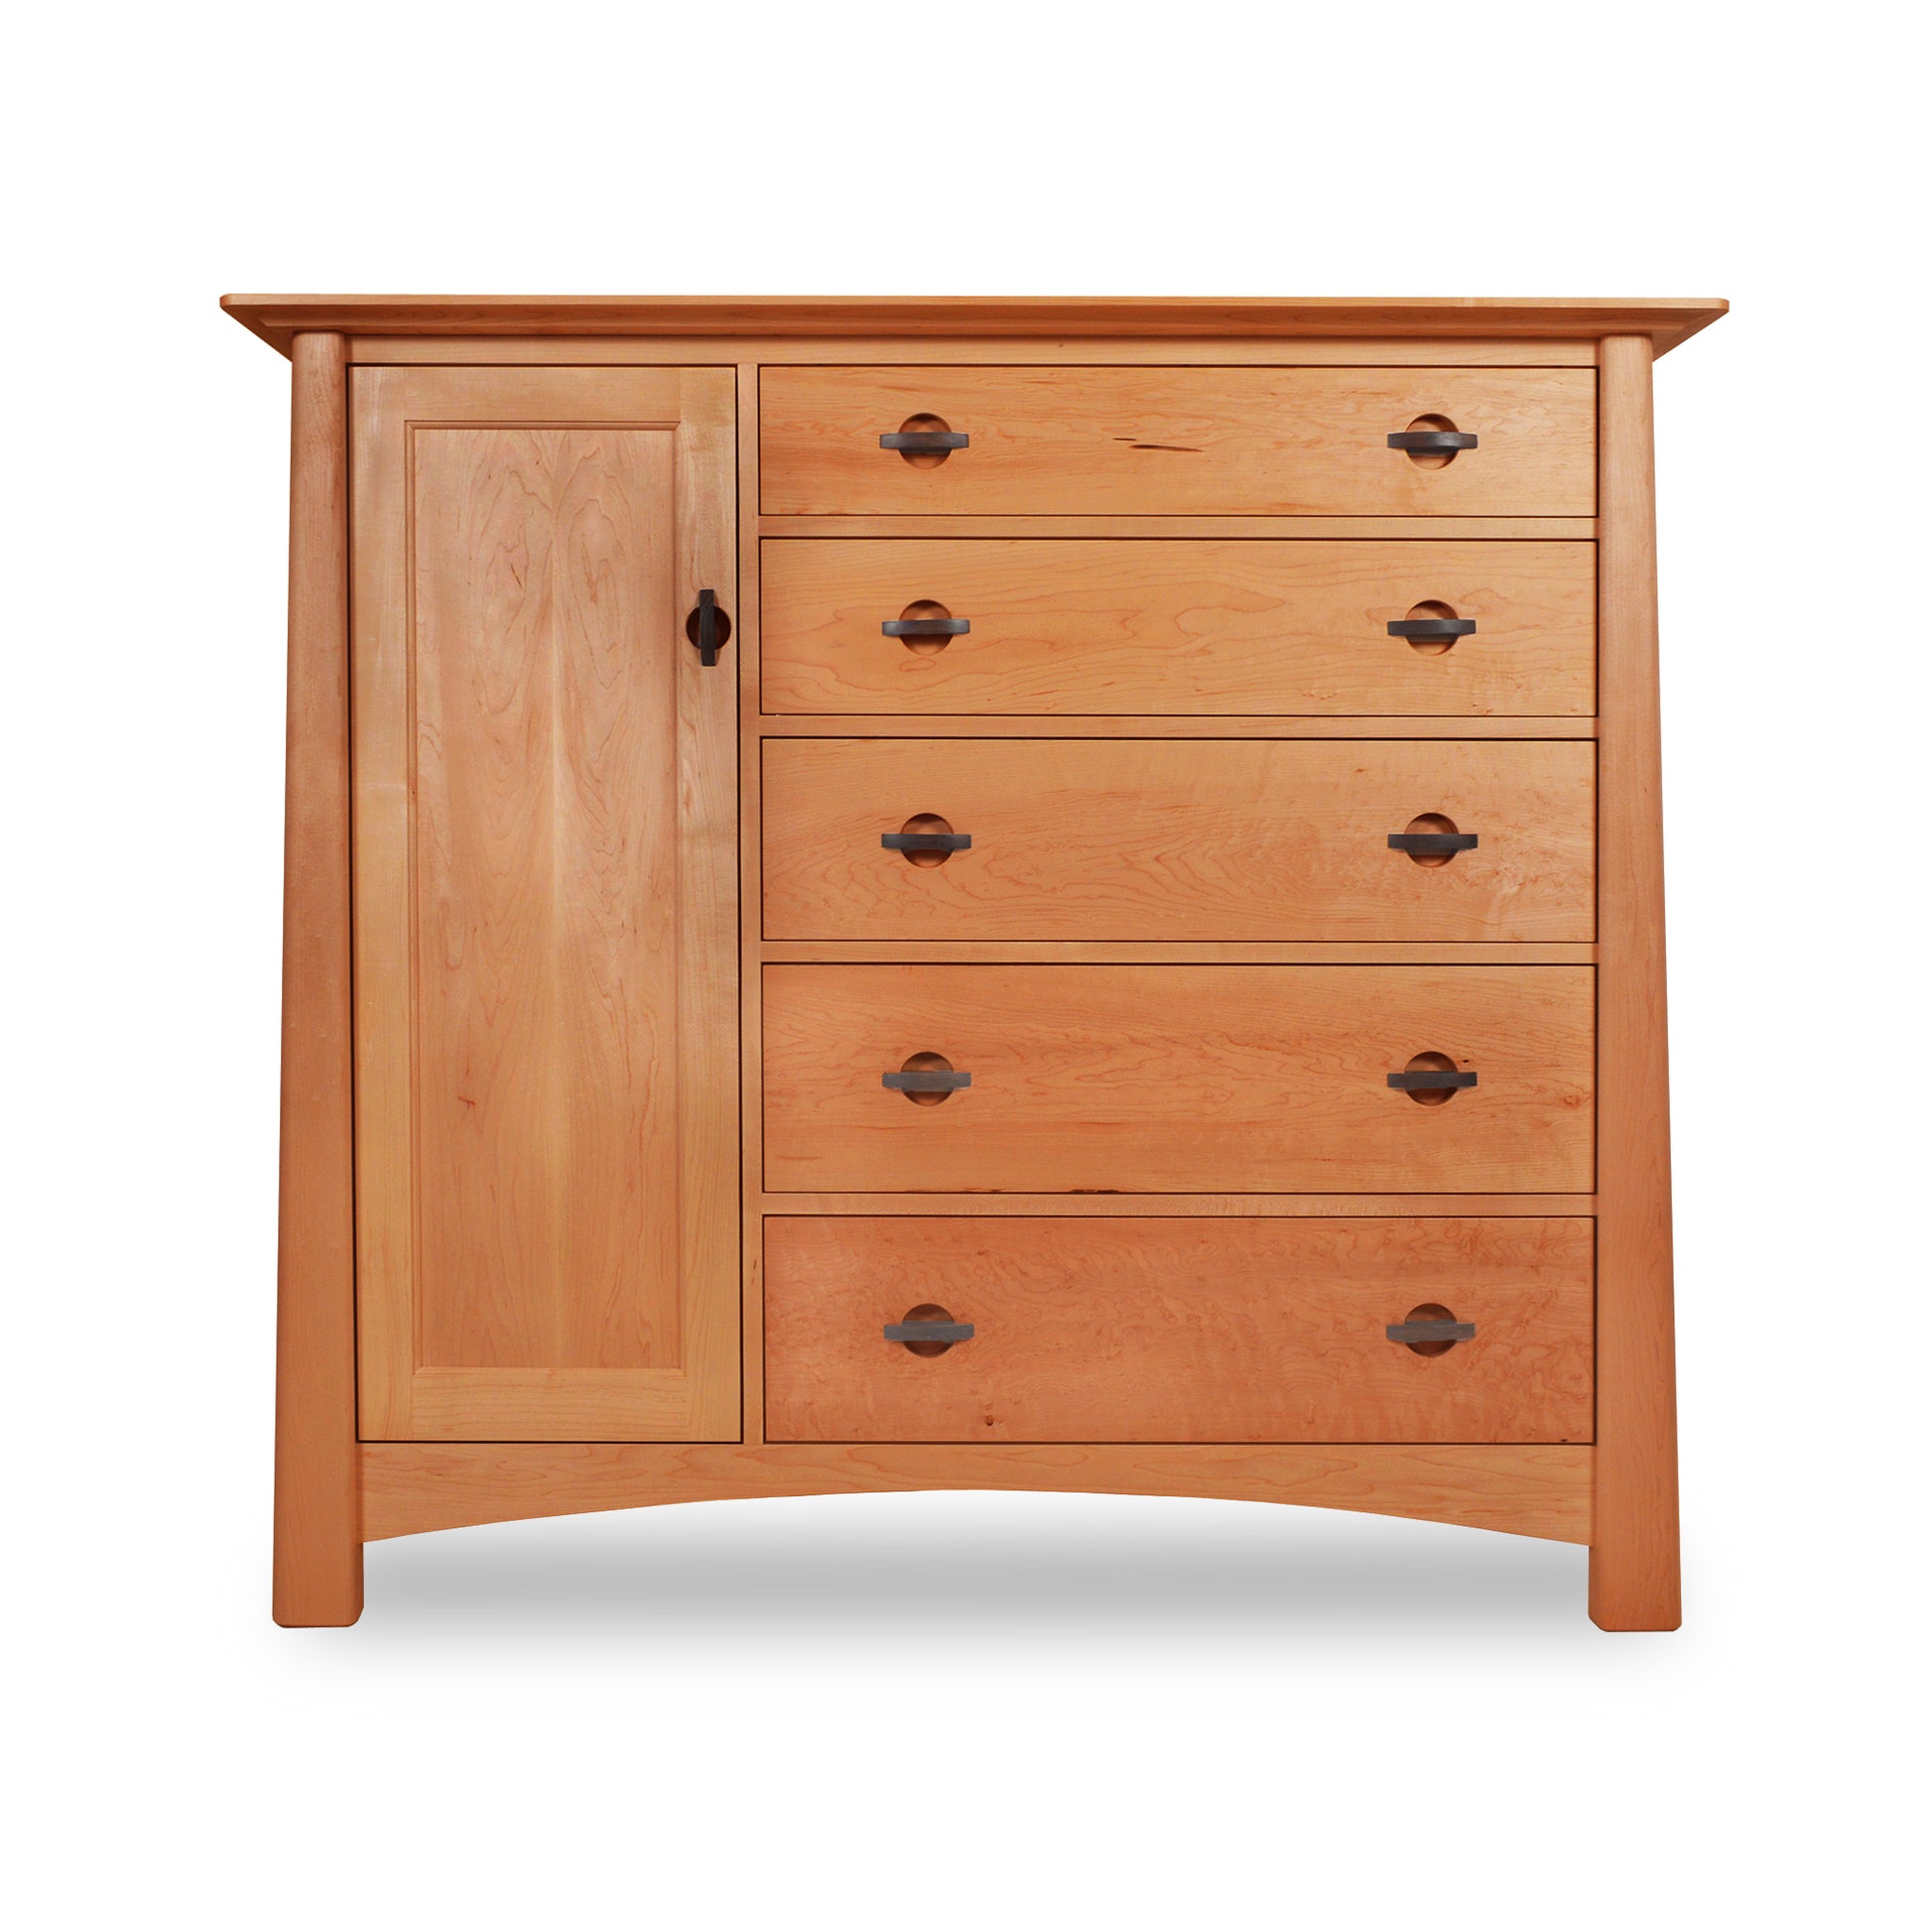 Maple Corner Woodworks Cherry Moon Gent's Chest with a closed cabinet door on the left and five drawers with round knobs on the right, isolated on a white background.